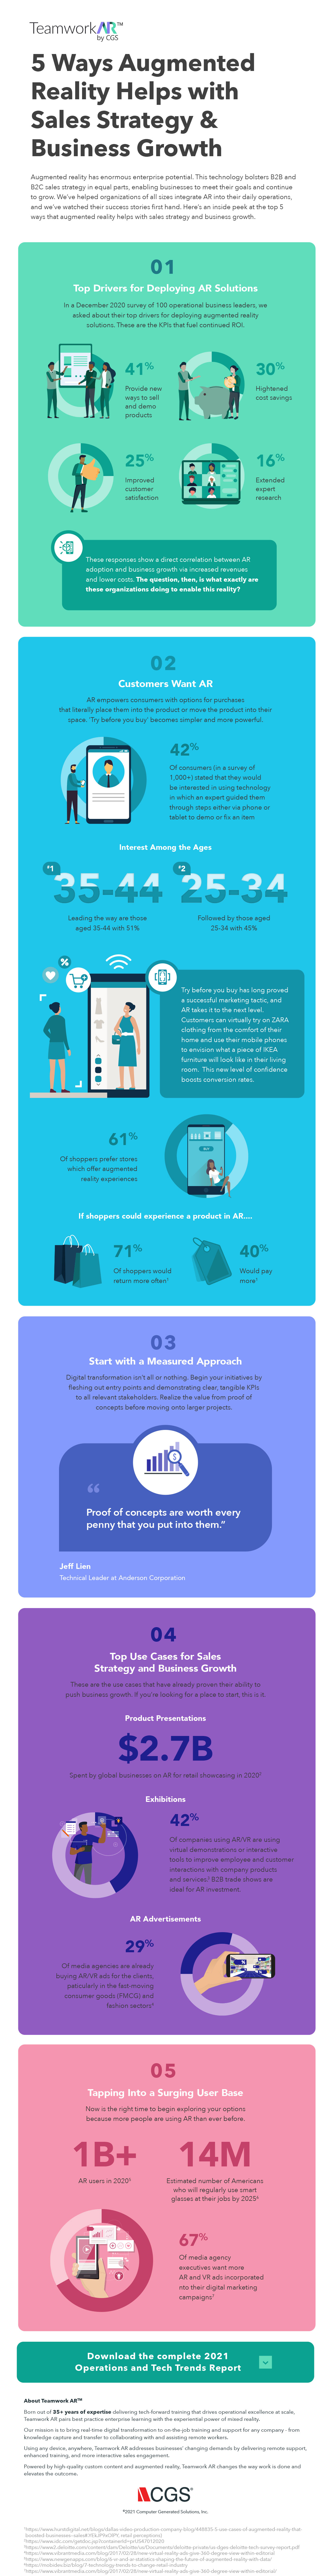 5 Ways Augmented Reality Helps with Sales Strategy & Business Growth infographic